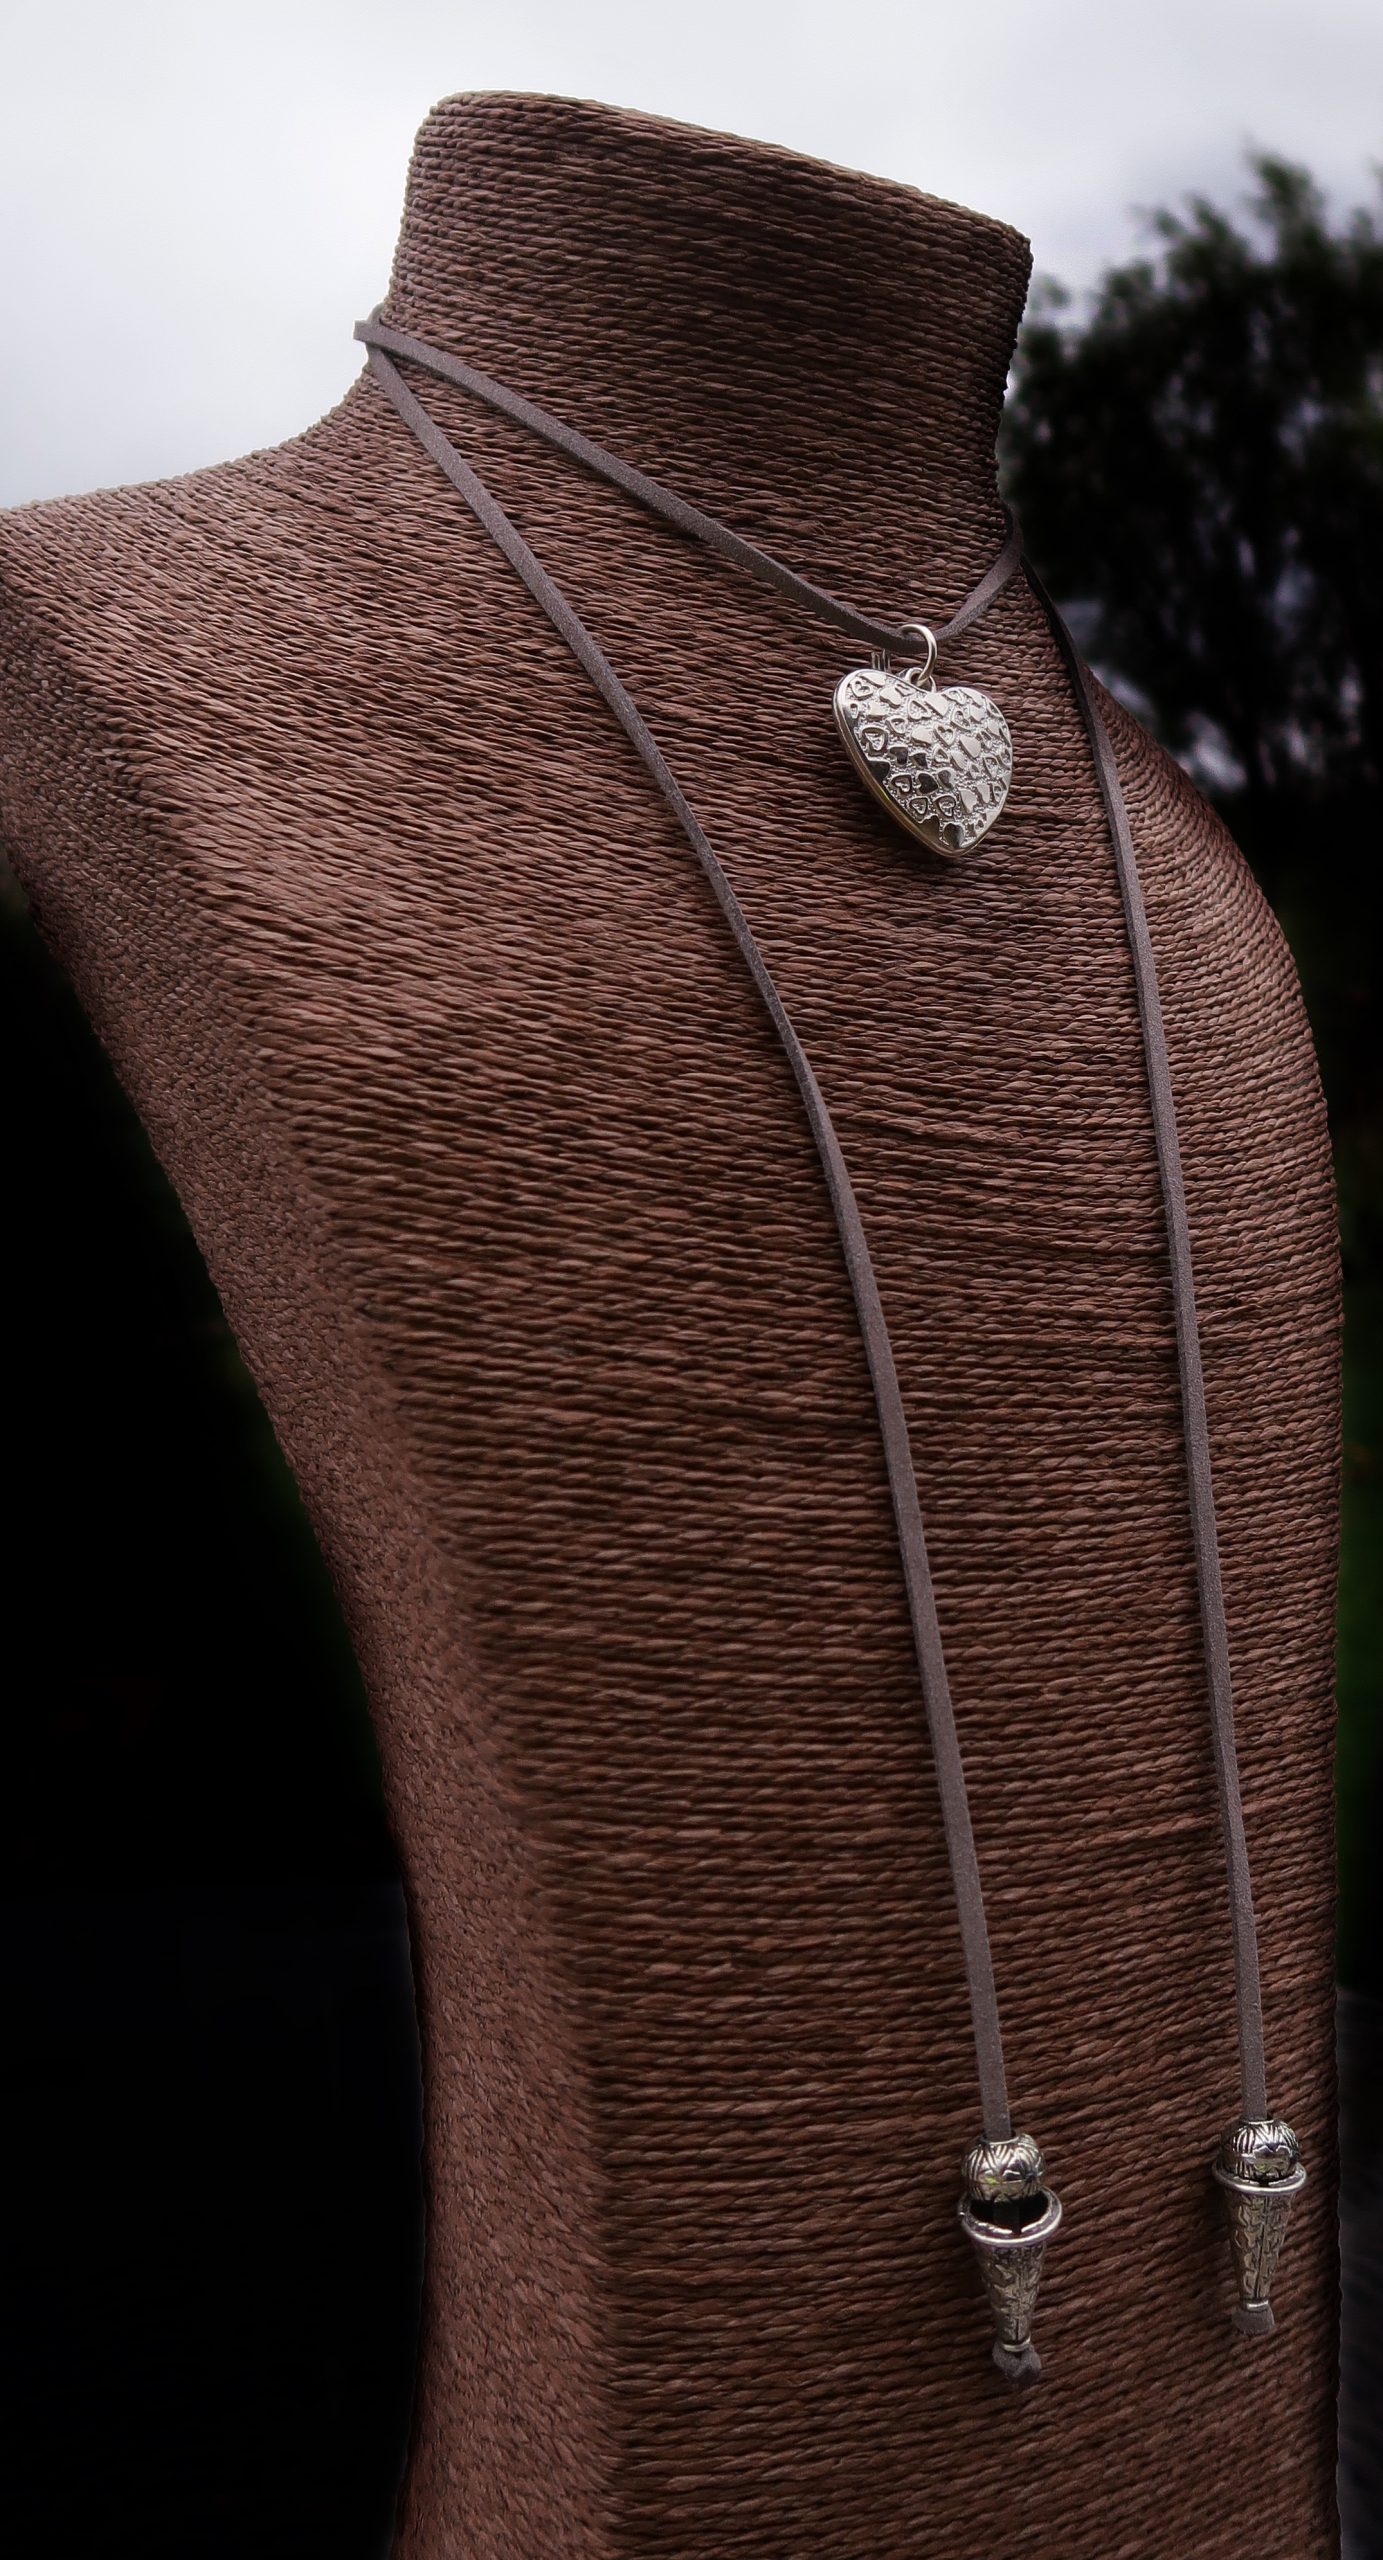 Heartfrost necklace